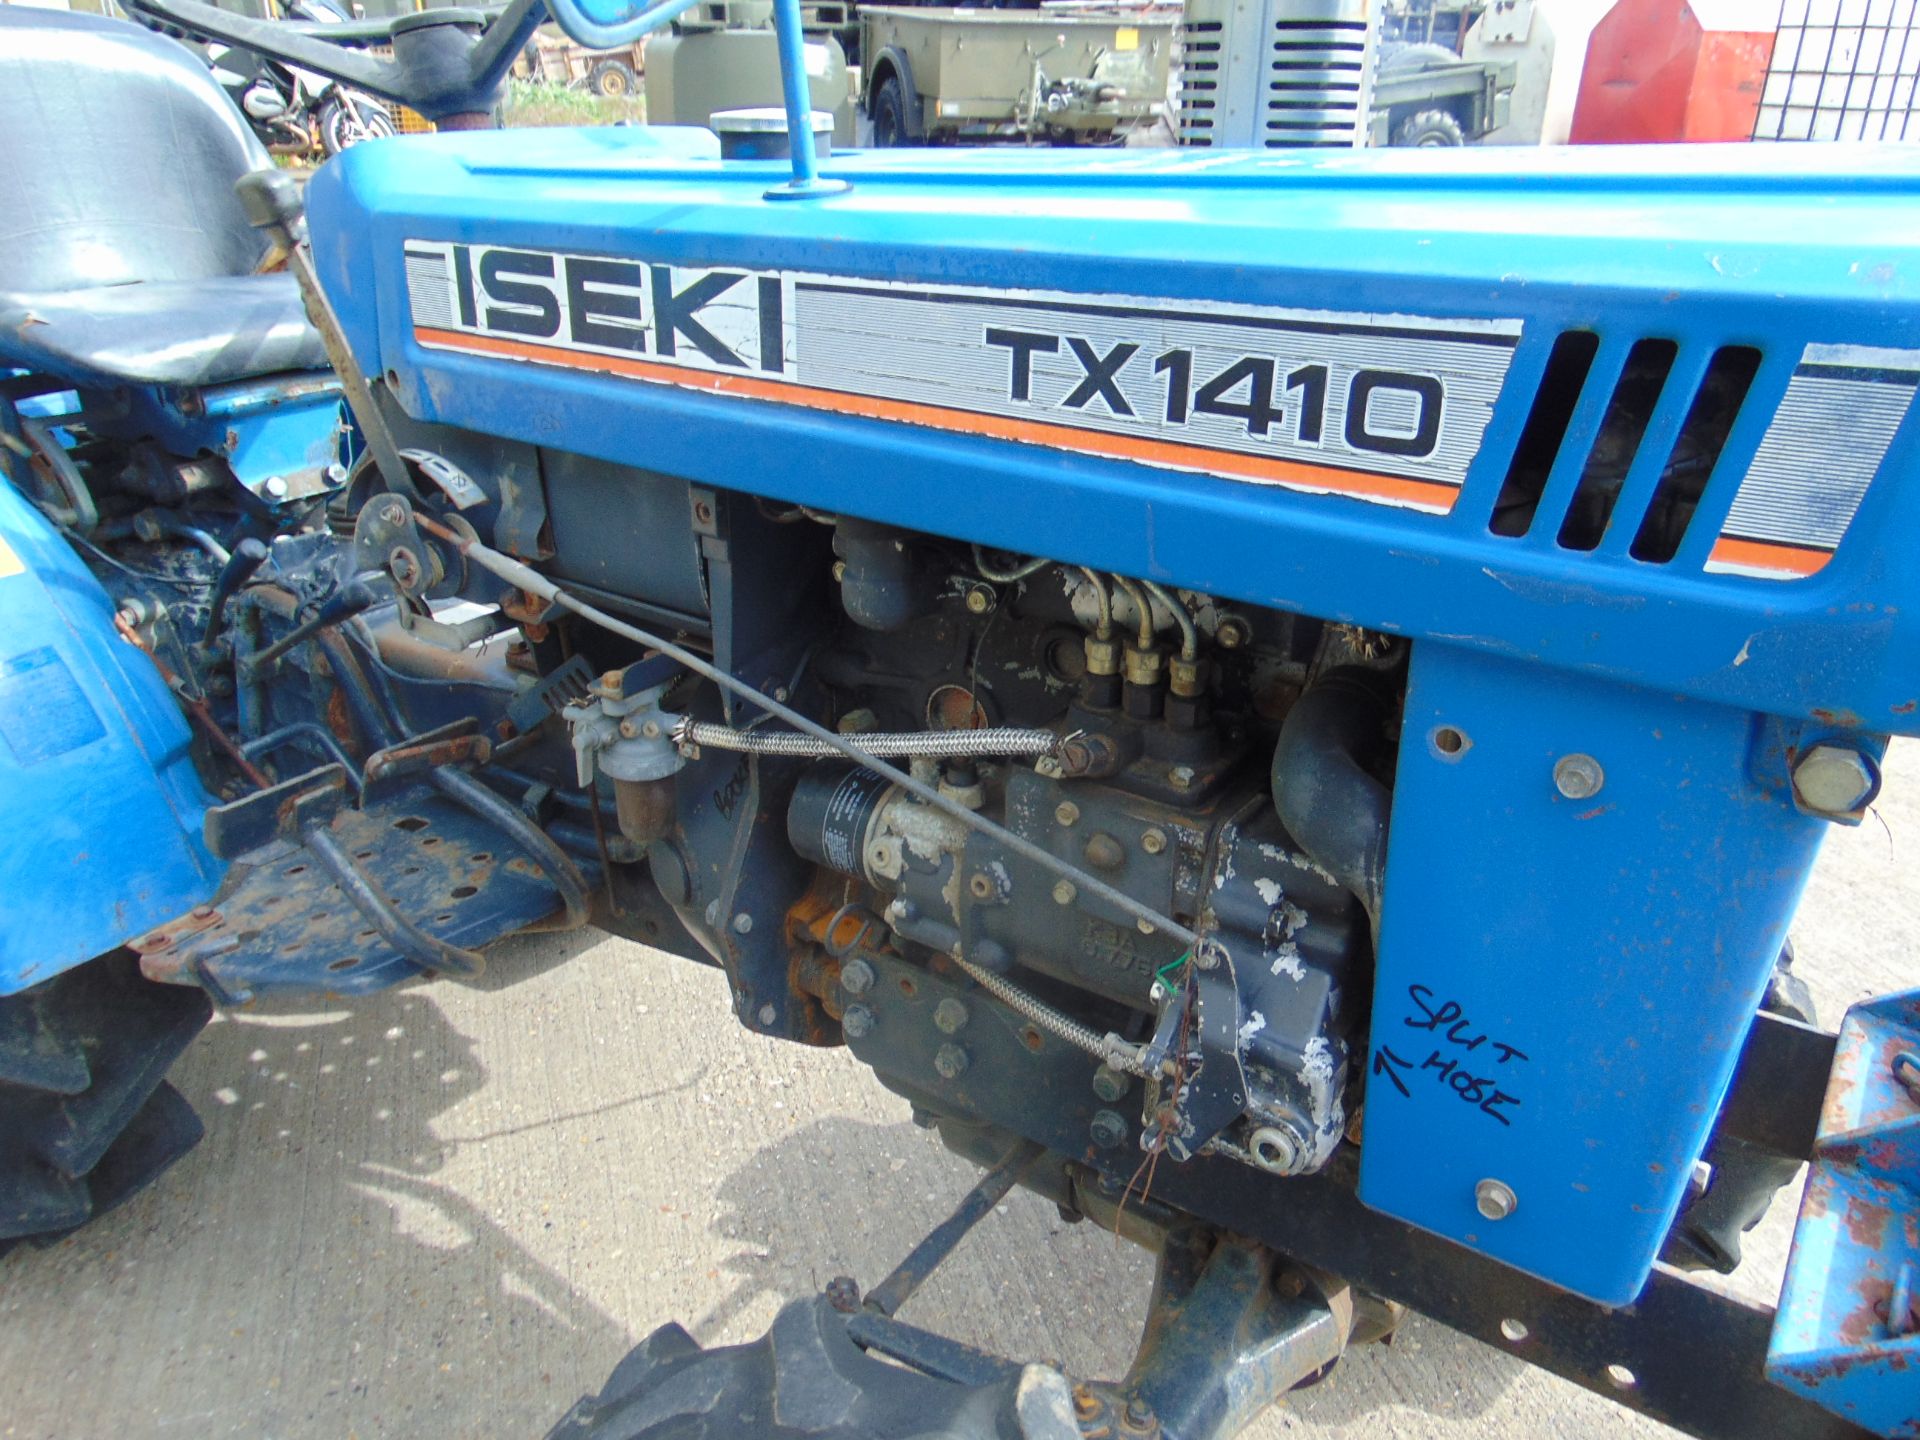 Iseki TX1410 4x4 Compact Tractor w/ Rotary Tiller - Image 19 of 24